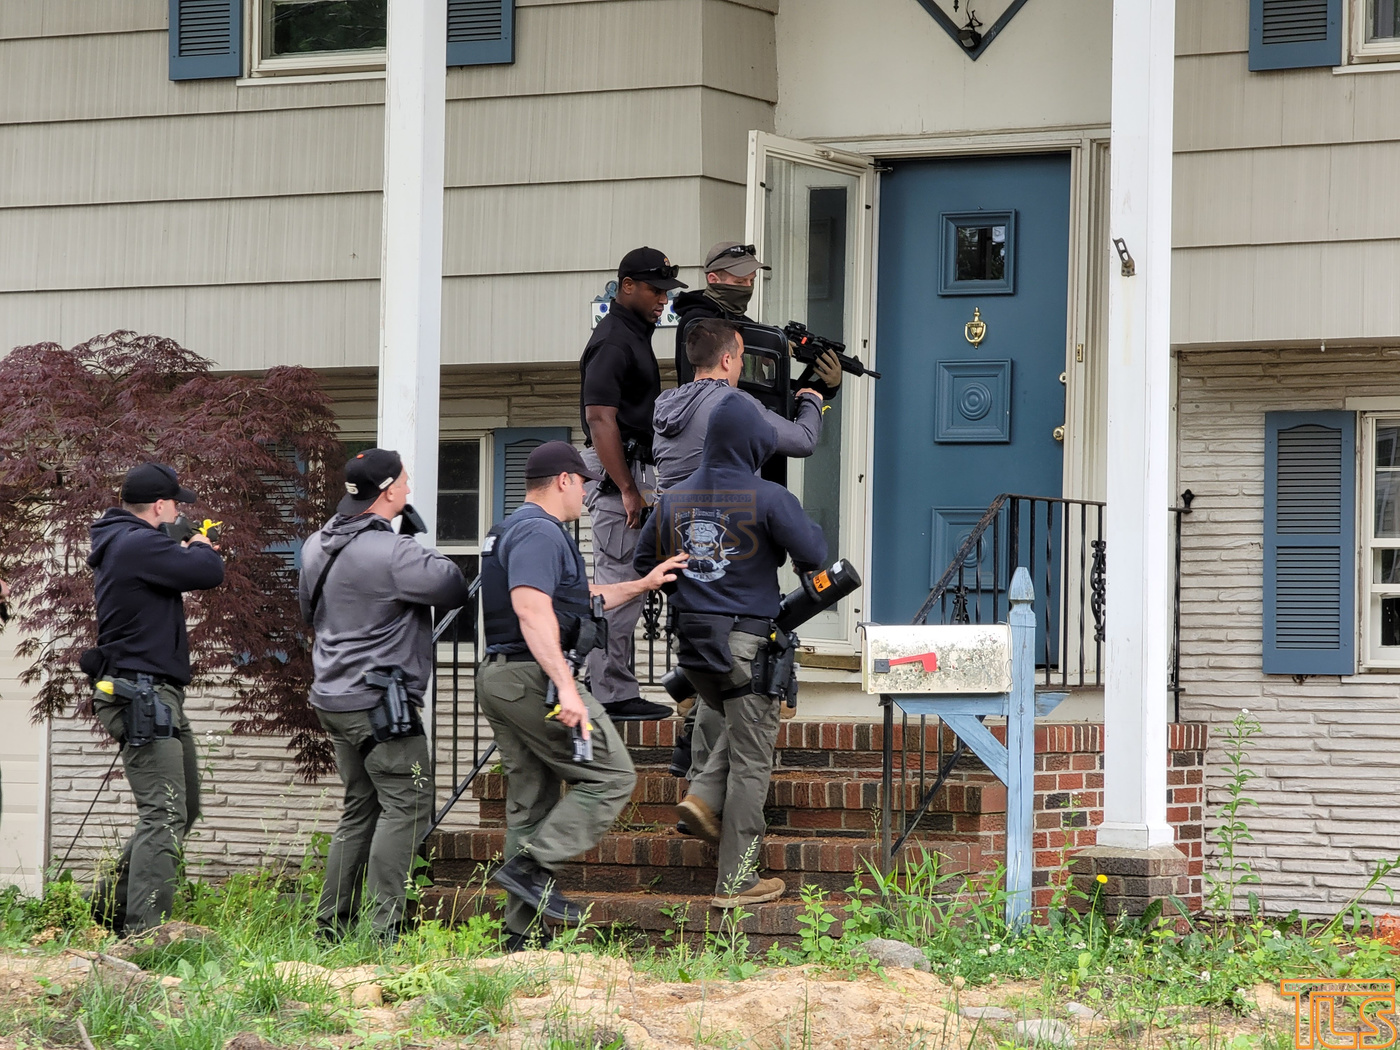 PHOTOS: Lakewood SWAT Team Conducts Training Exercise - The Lakewood Scoop